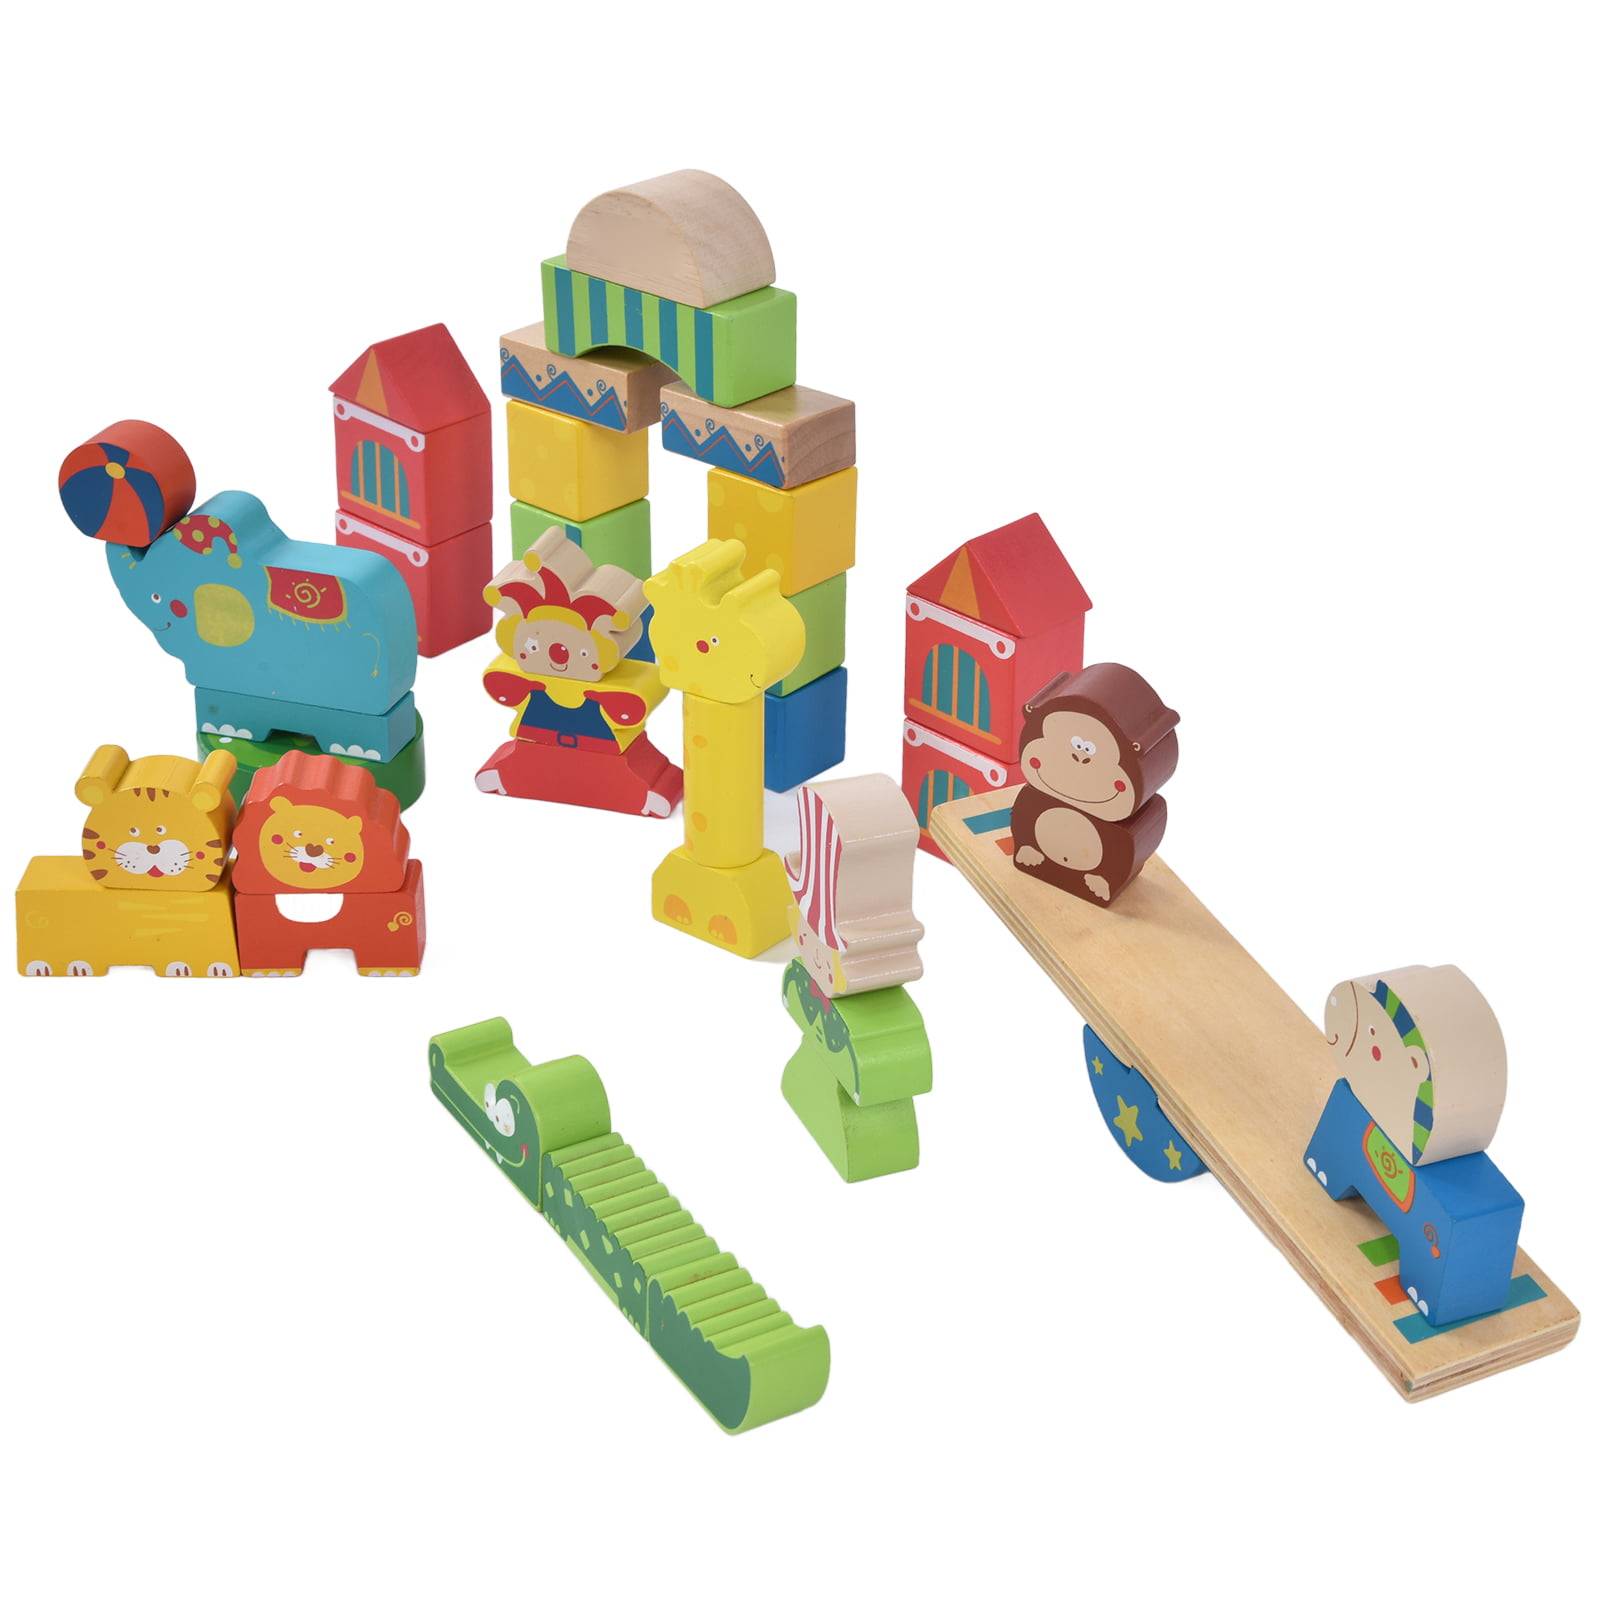 Wooden Construction Building Blocks Stacking Toy for Kids 